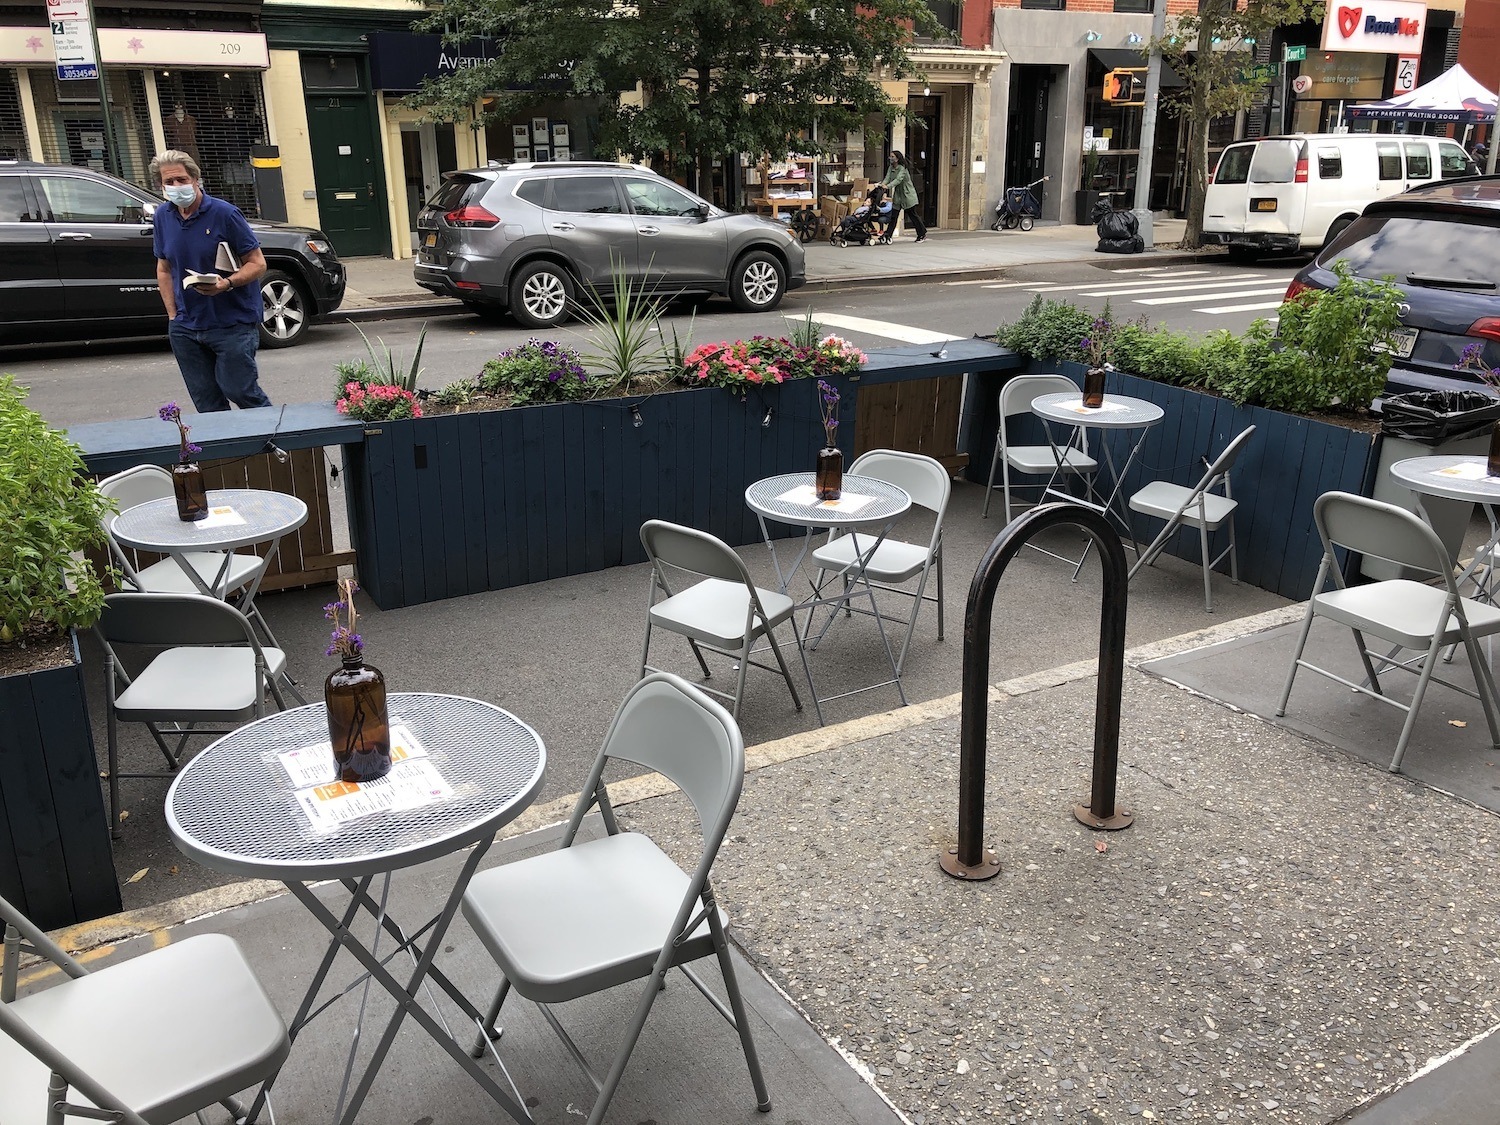 Outdoor dining in New York City without an ADA ramp. October 2020